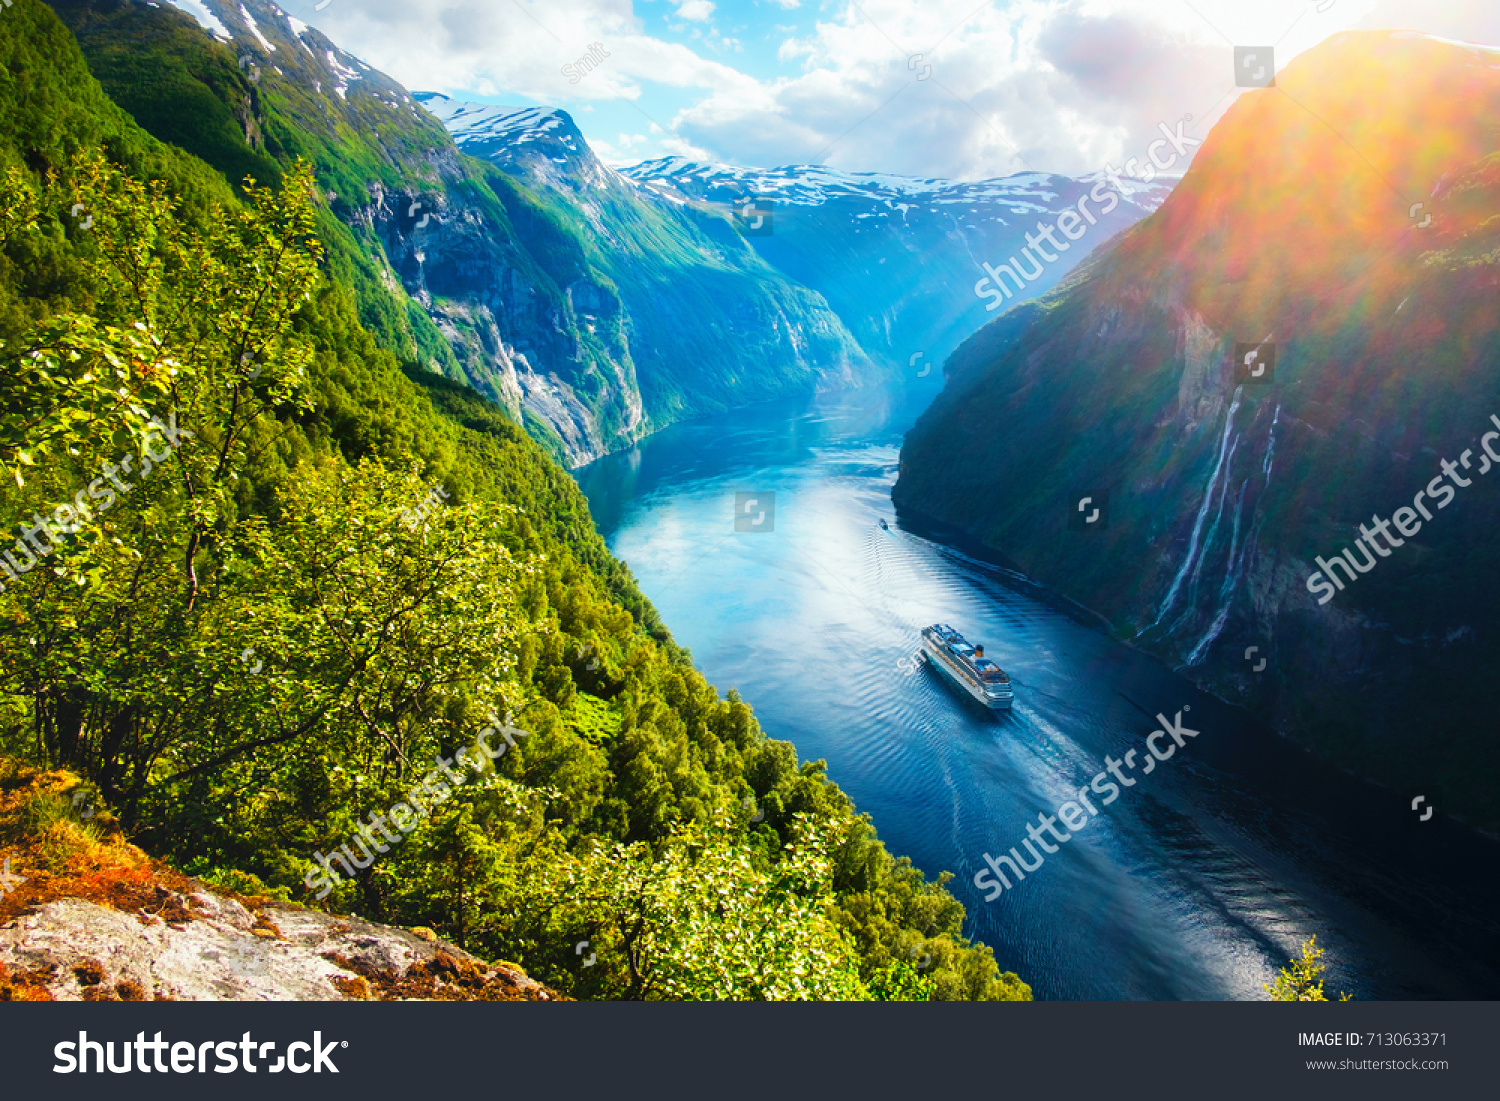 Breathtaking norway view of Sunnylvsfjorden fjord with cruise ship and famous Seven Sisters waterfalls, near Geiranger village in western Norway. Landscape photography #713063371